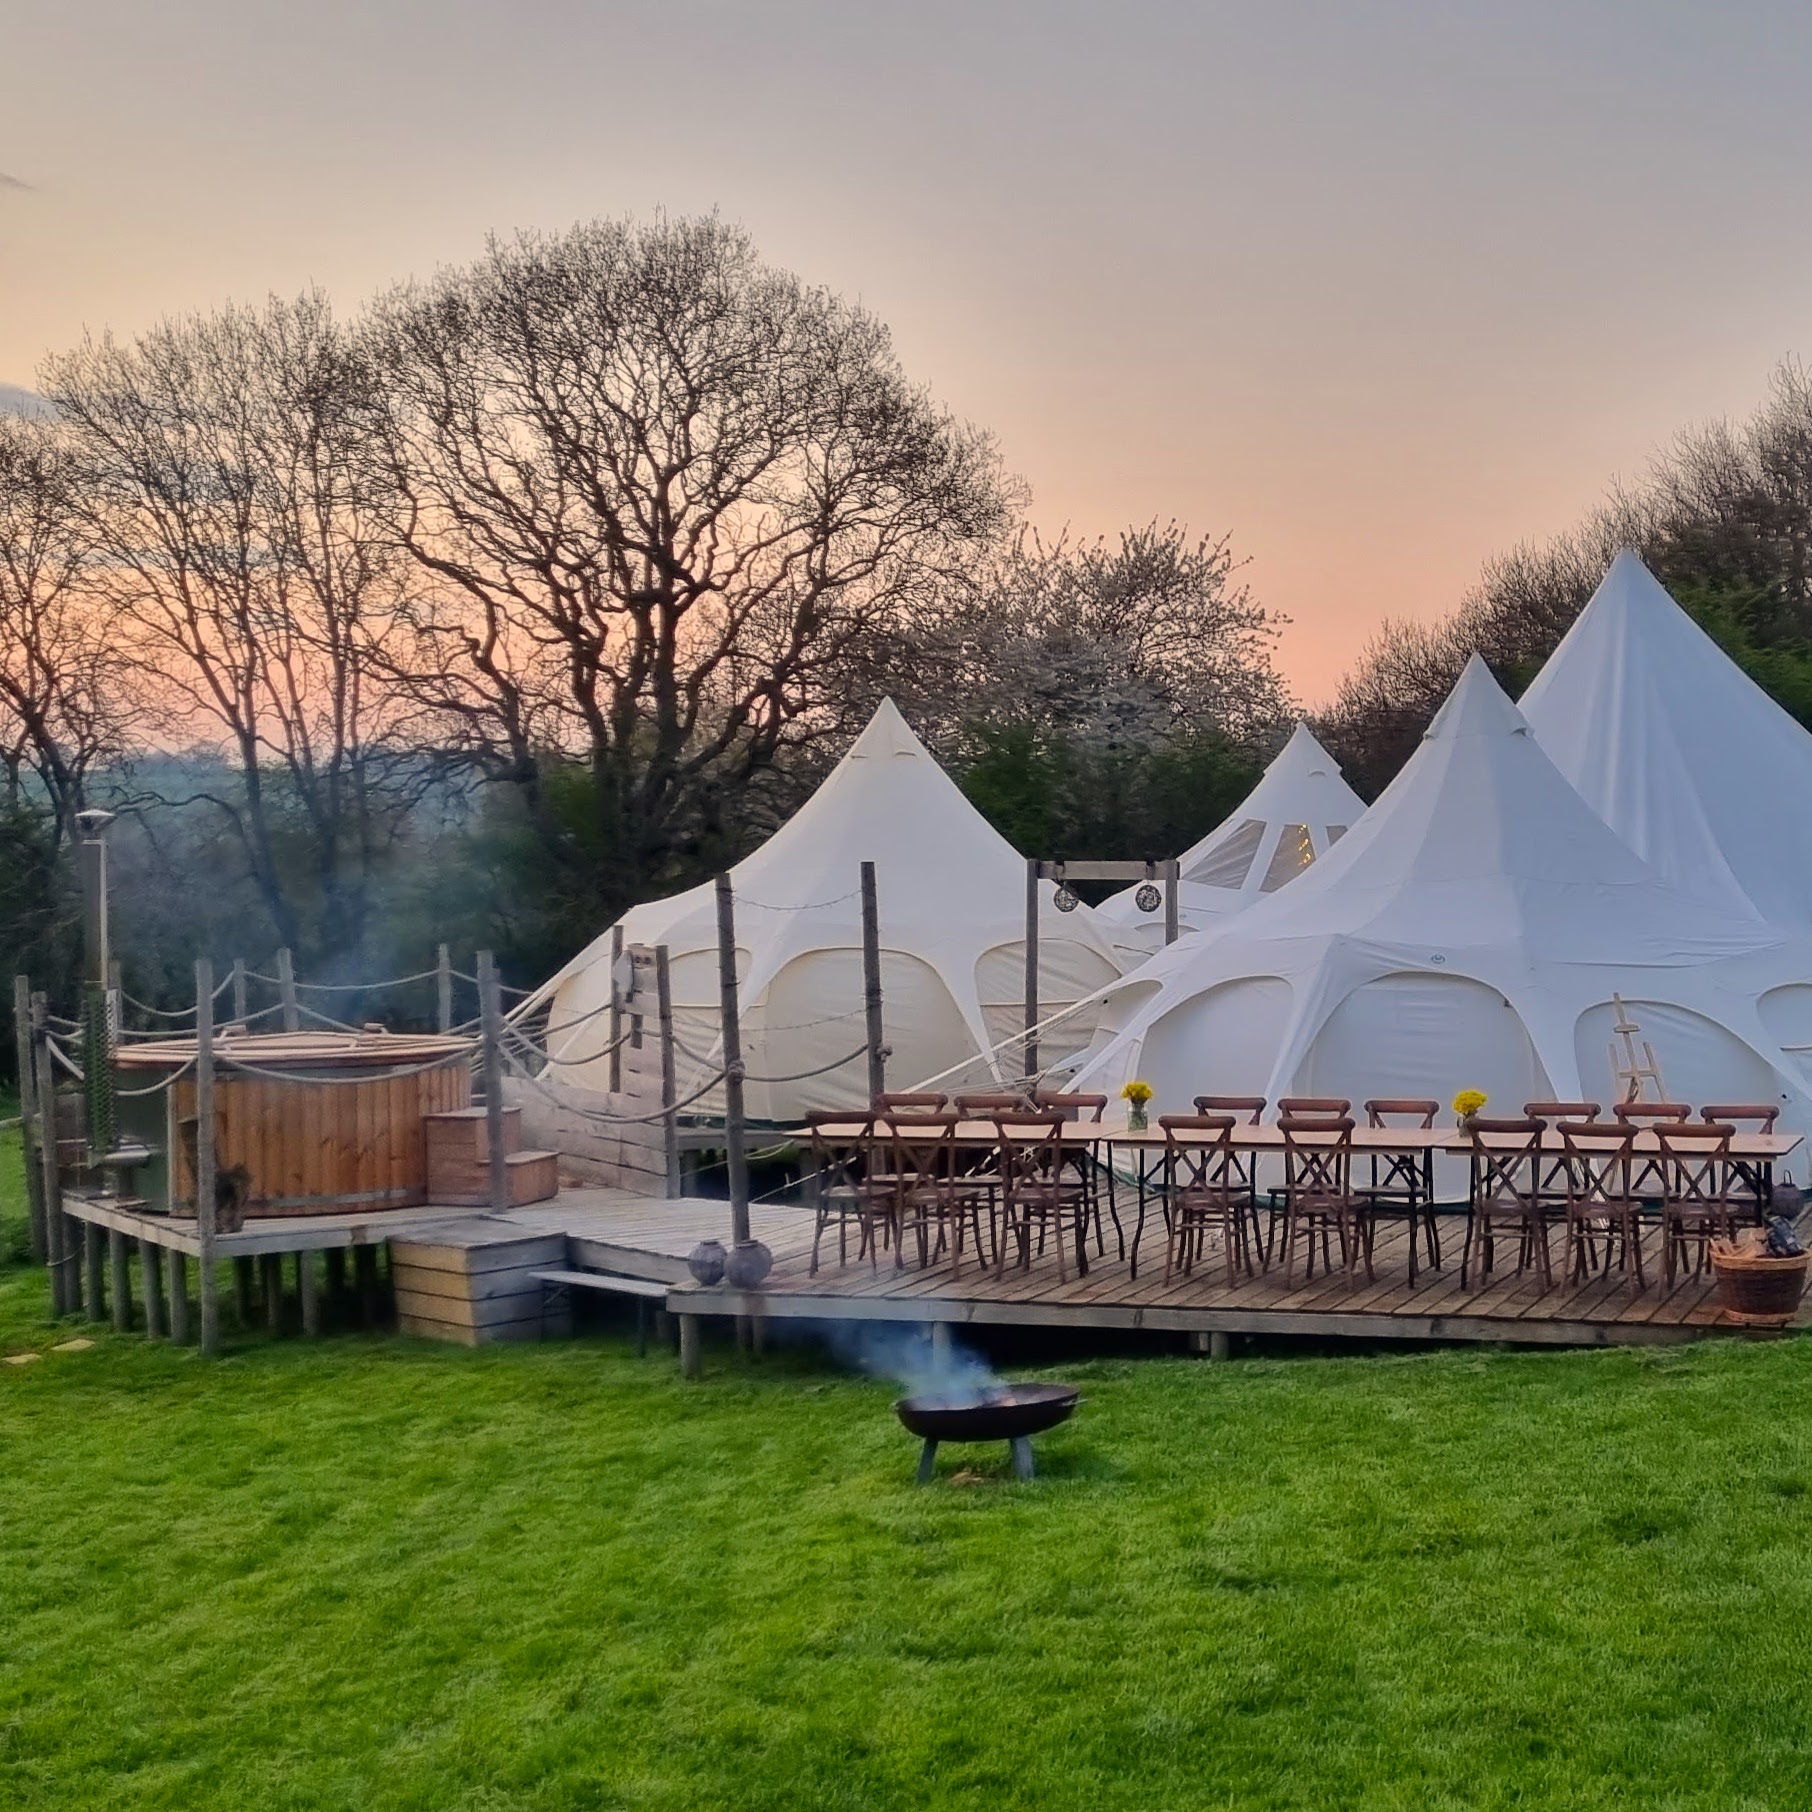 Hot hut glamping holidays & breaks at Campfires & Stars in The Cotswolds